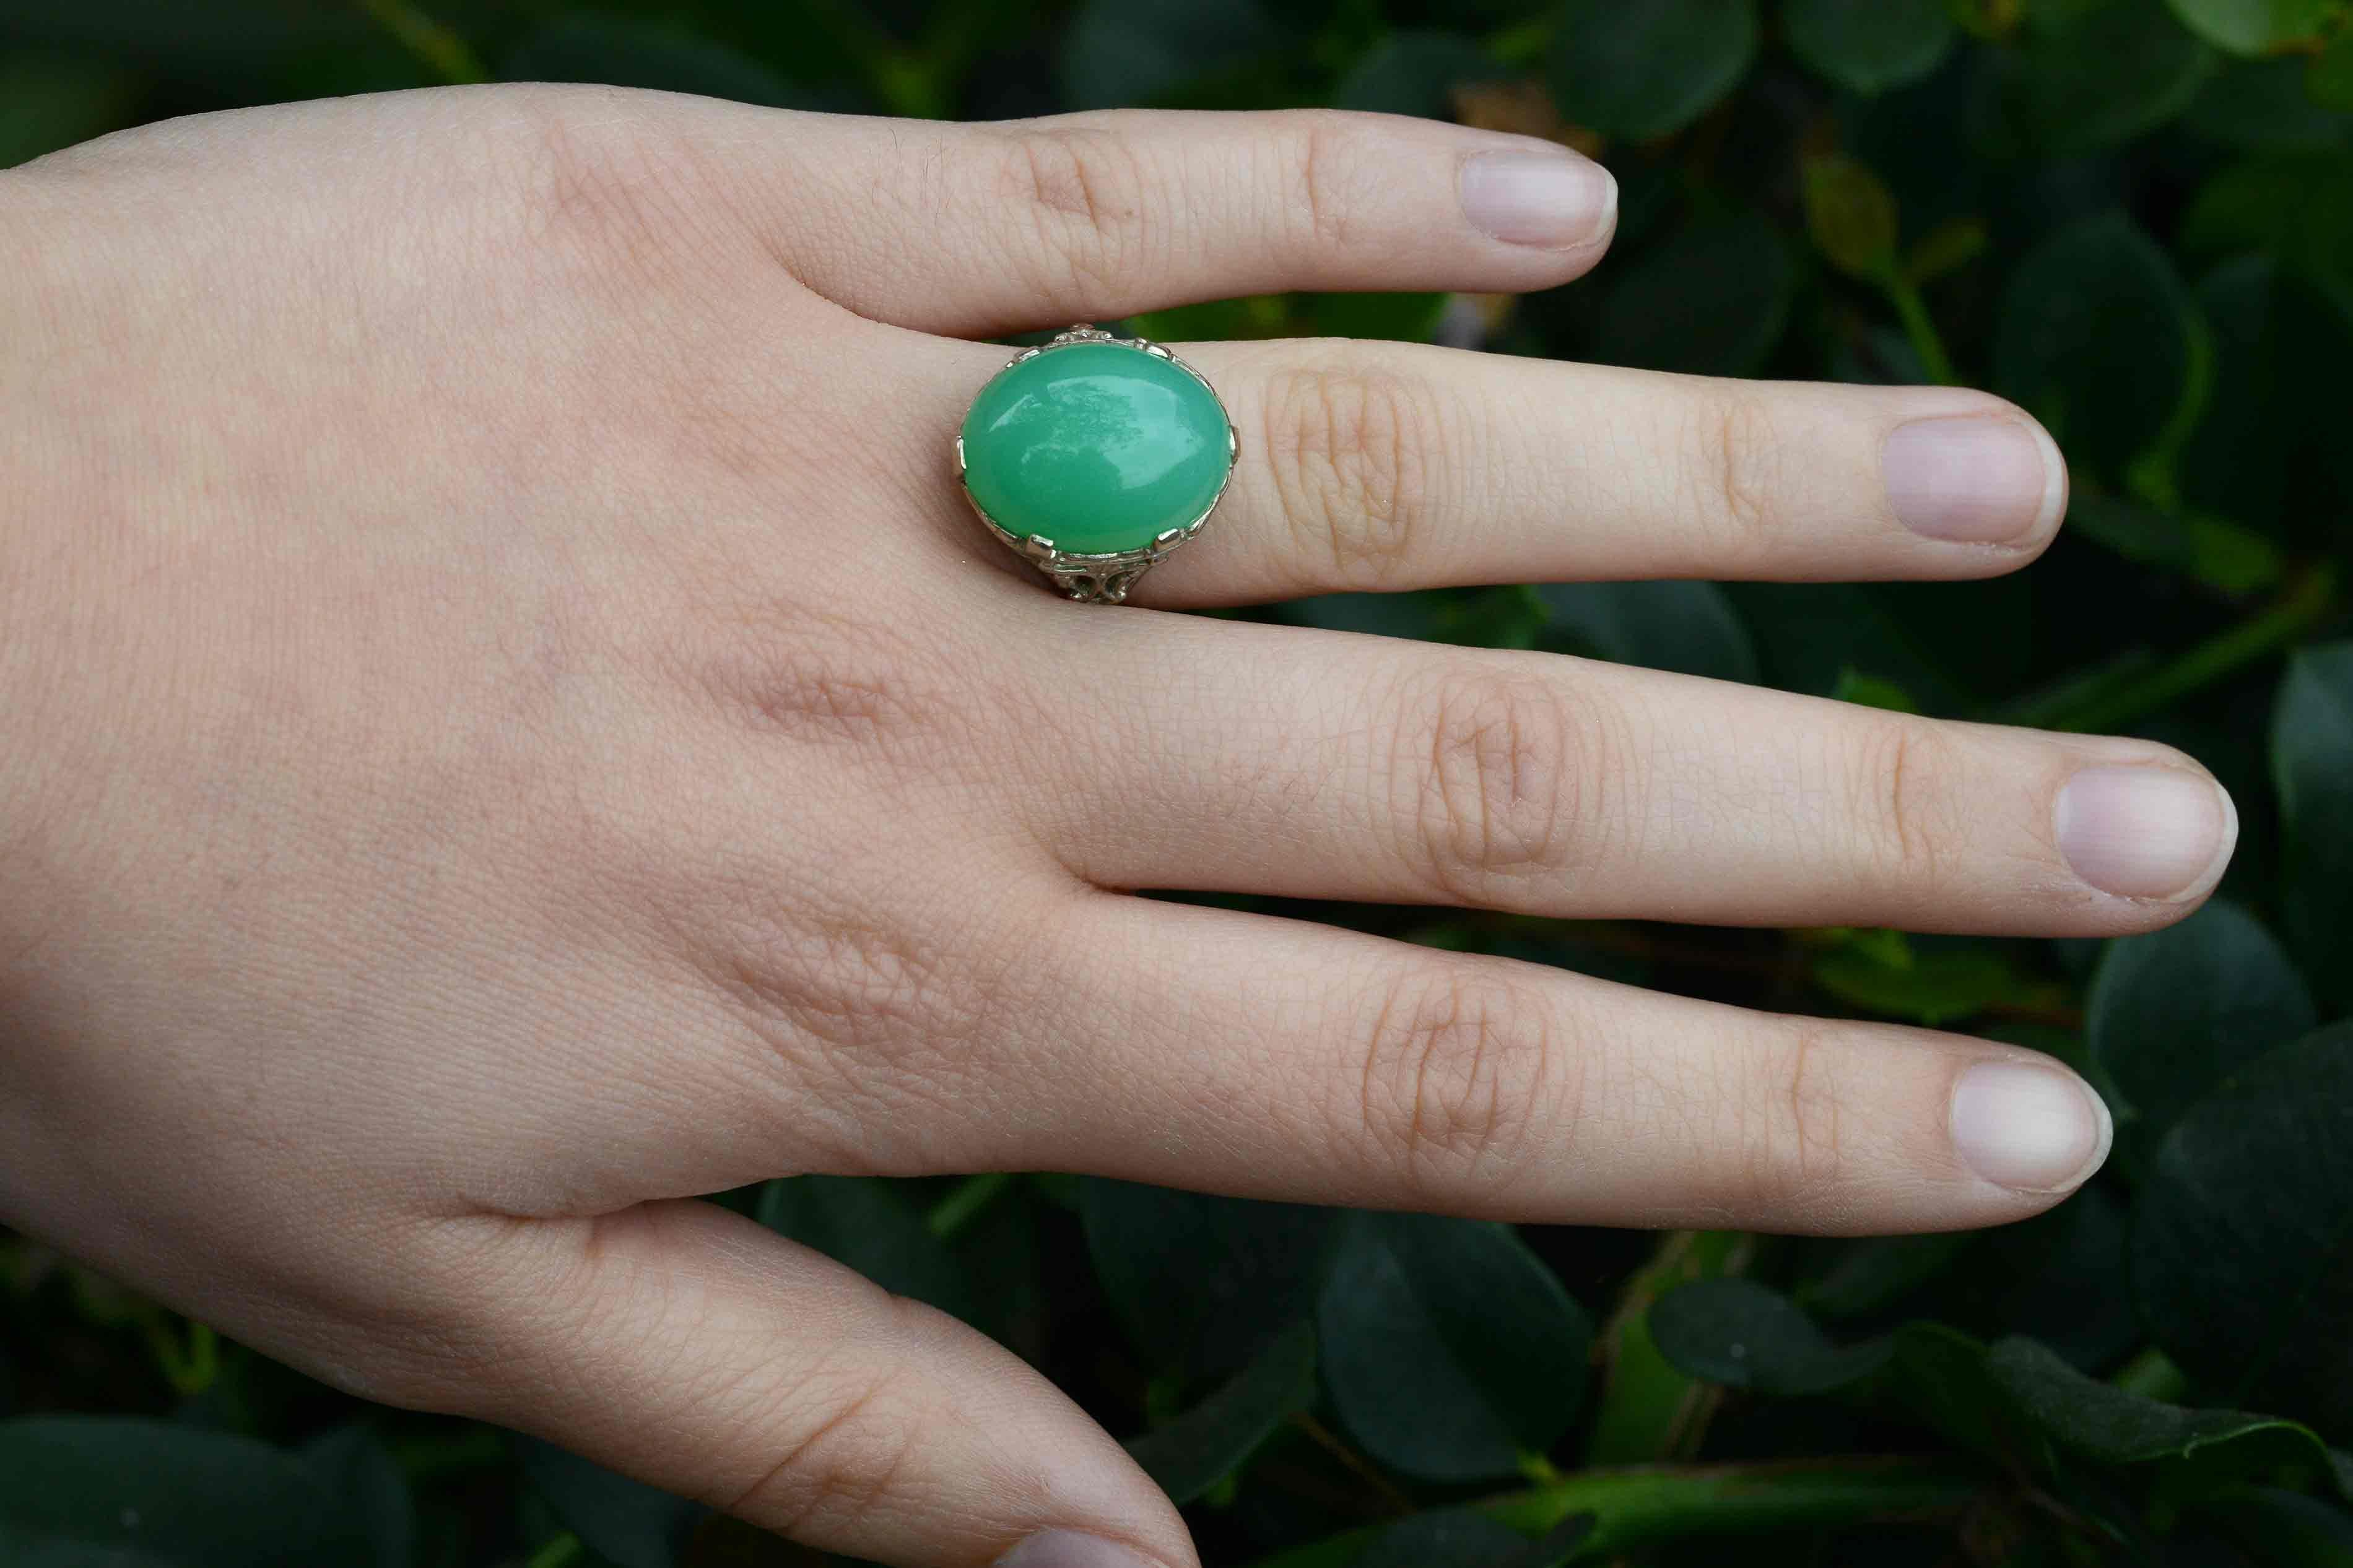 A most enchanting and soothing gemstone of a captivating and lustrous apple-green, this Chrysoprase dome cabochon cocktail ring takes center stage in this Victorian inspired stunner. You will swoon over her fabulous foliate scrolls and white gold